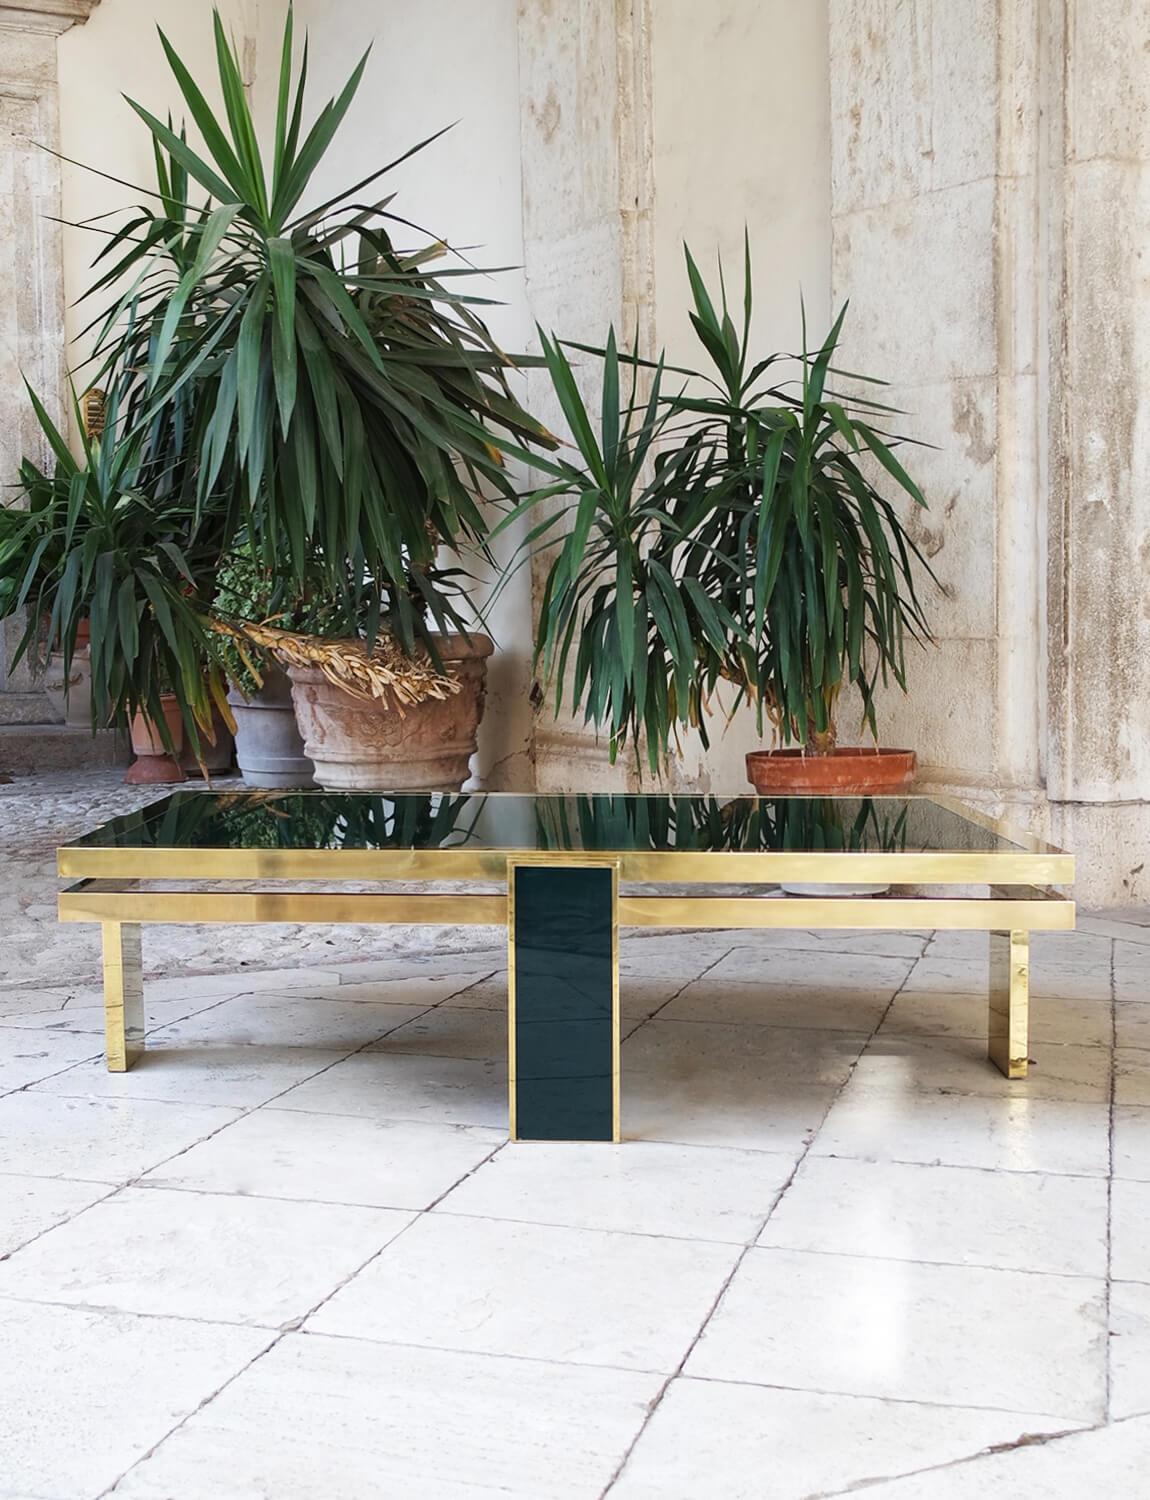 An exceptional piece of Italian design history. Liwans 1970s dark green glass and brass coffee table found in Italy. This spectacular mid-century modern design piece was made by the renowned designer, Giacomo Sinopoli for Liwans, the Roman furniture